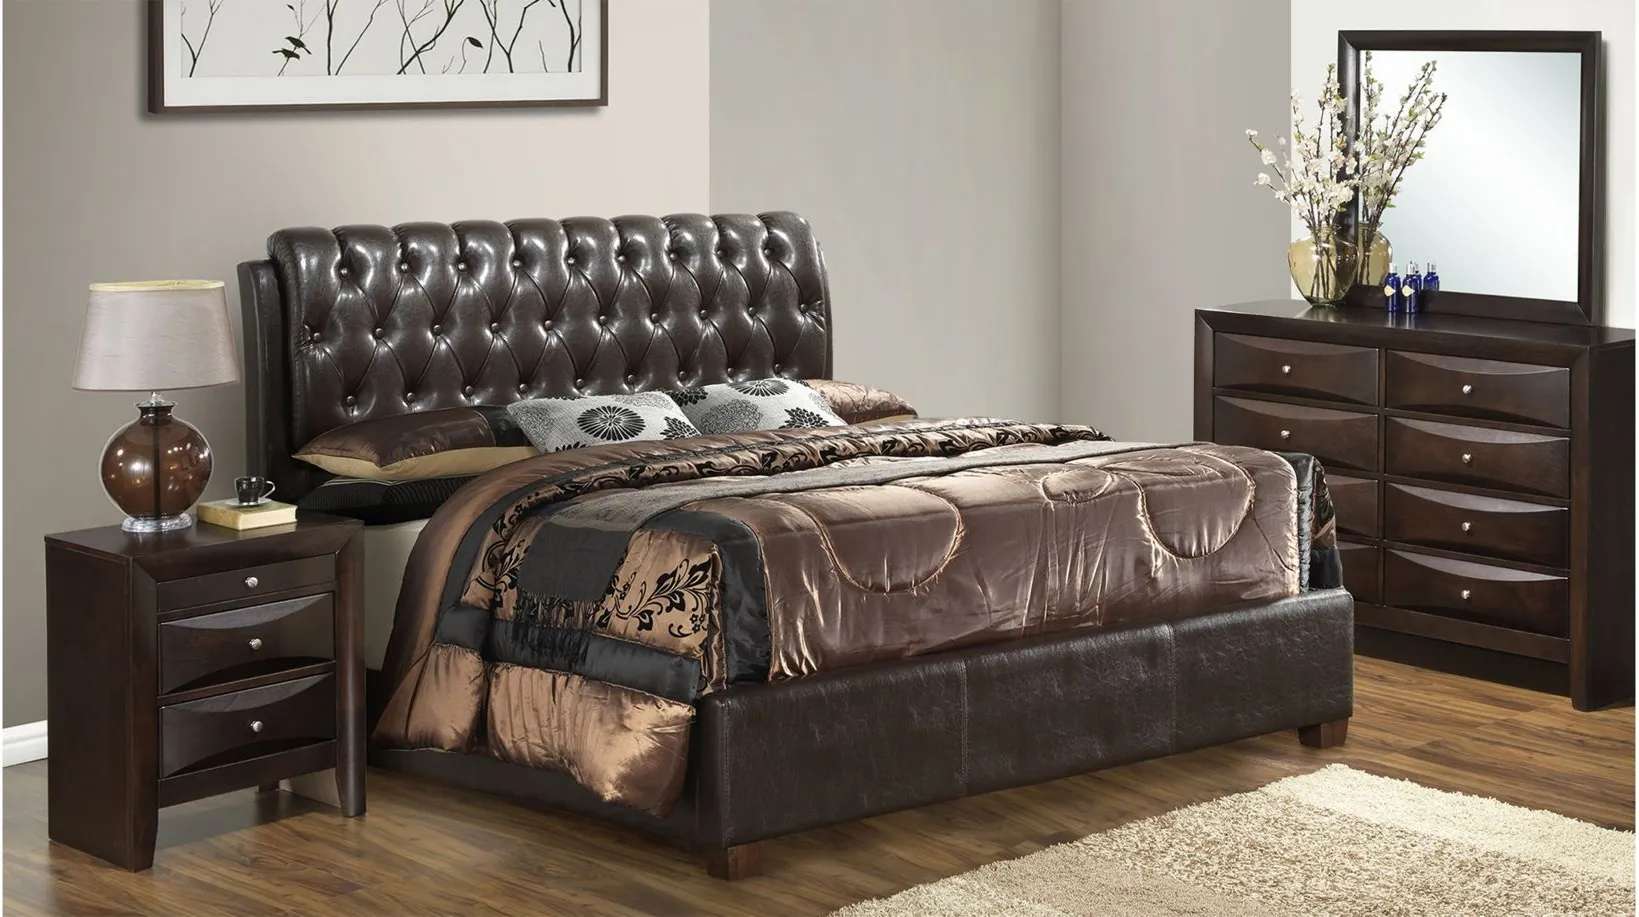 Marilla 4-piece Upholstered Bedroom Set in Cappuccino by Glory Furniture